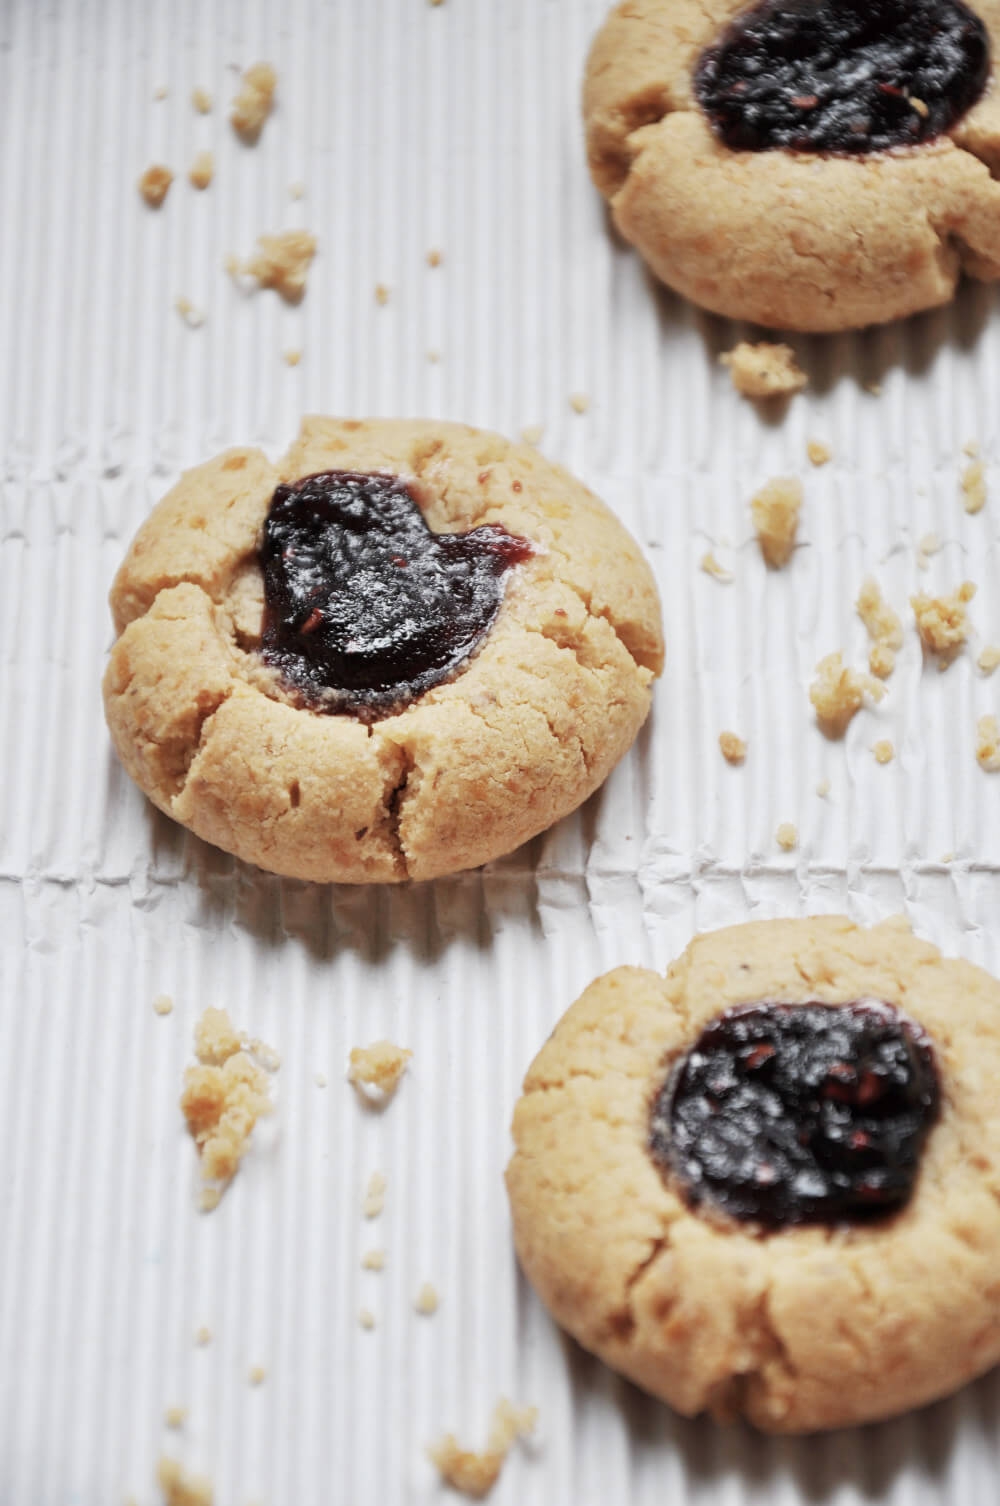 Peanut Butter and Berry Jam Cookies